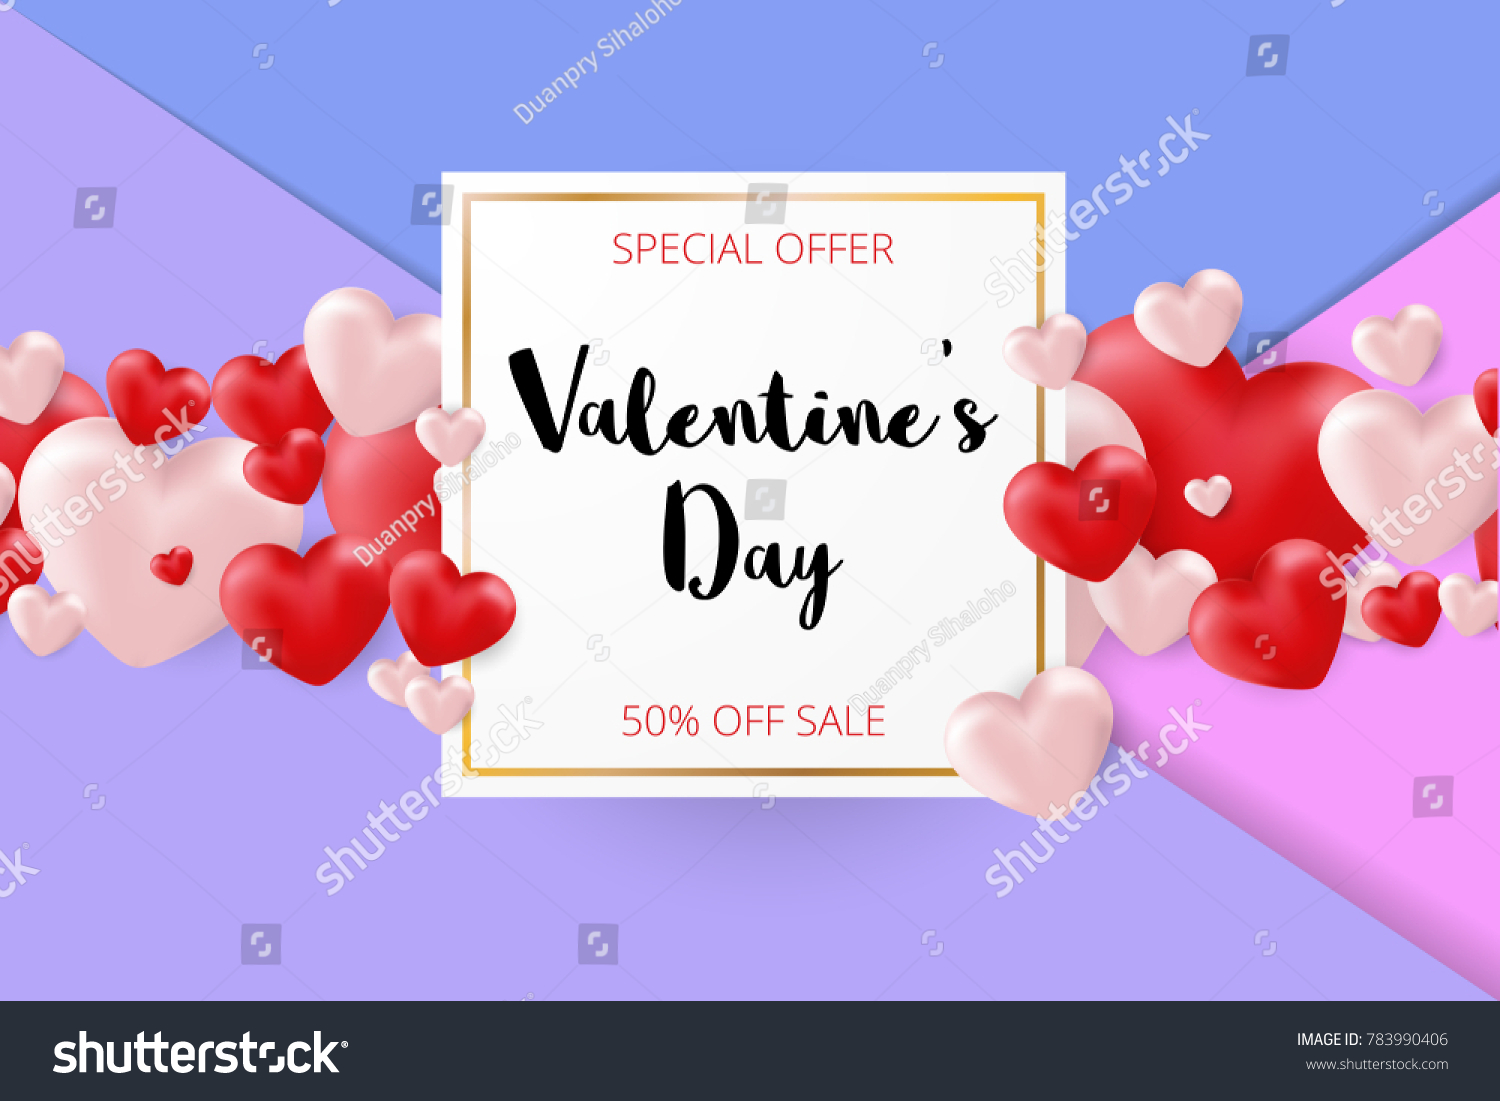 Valentines day sale background. Vector illustration. Wallpaper, flyers, invitation, posters, brochure, banners. #783990406